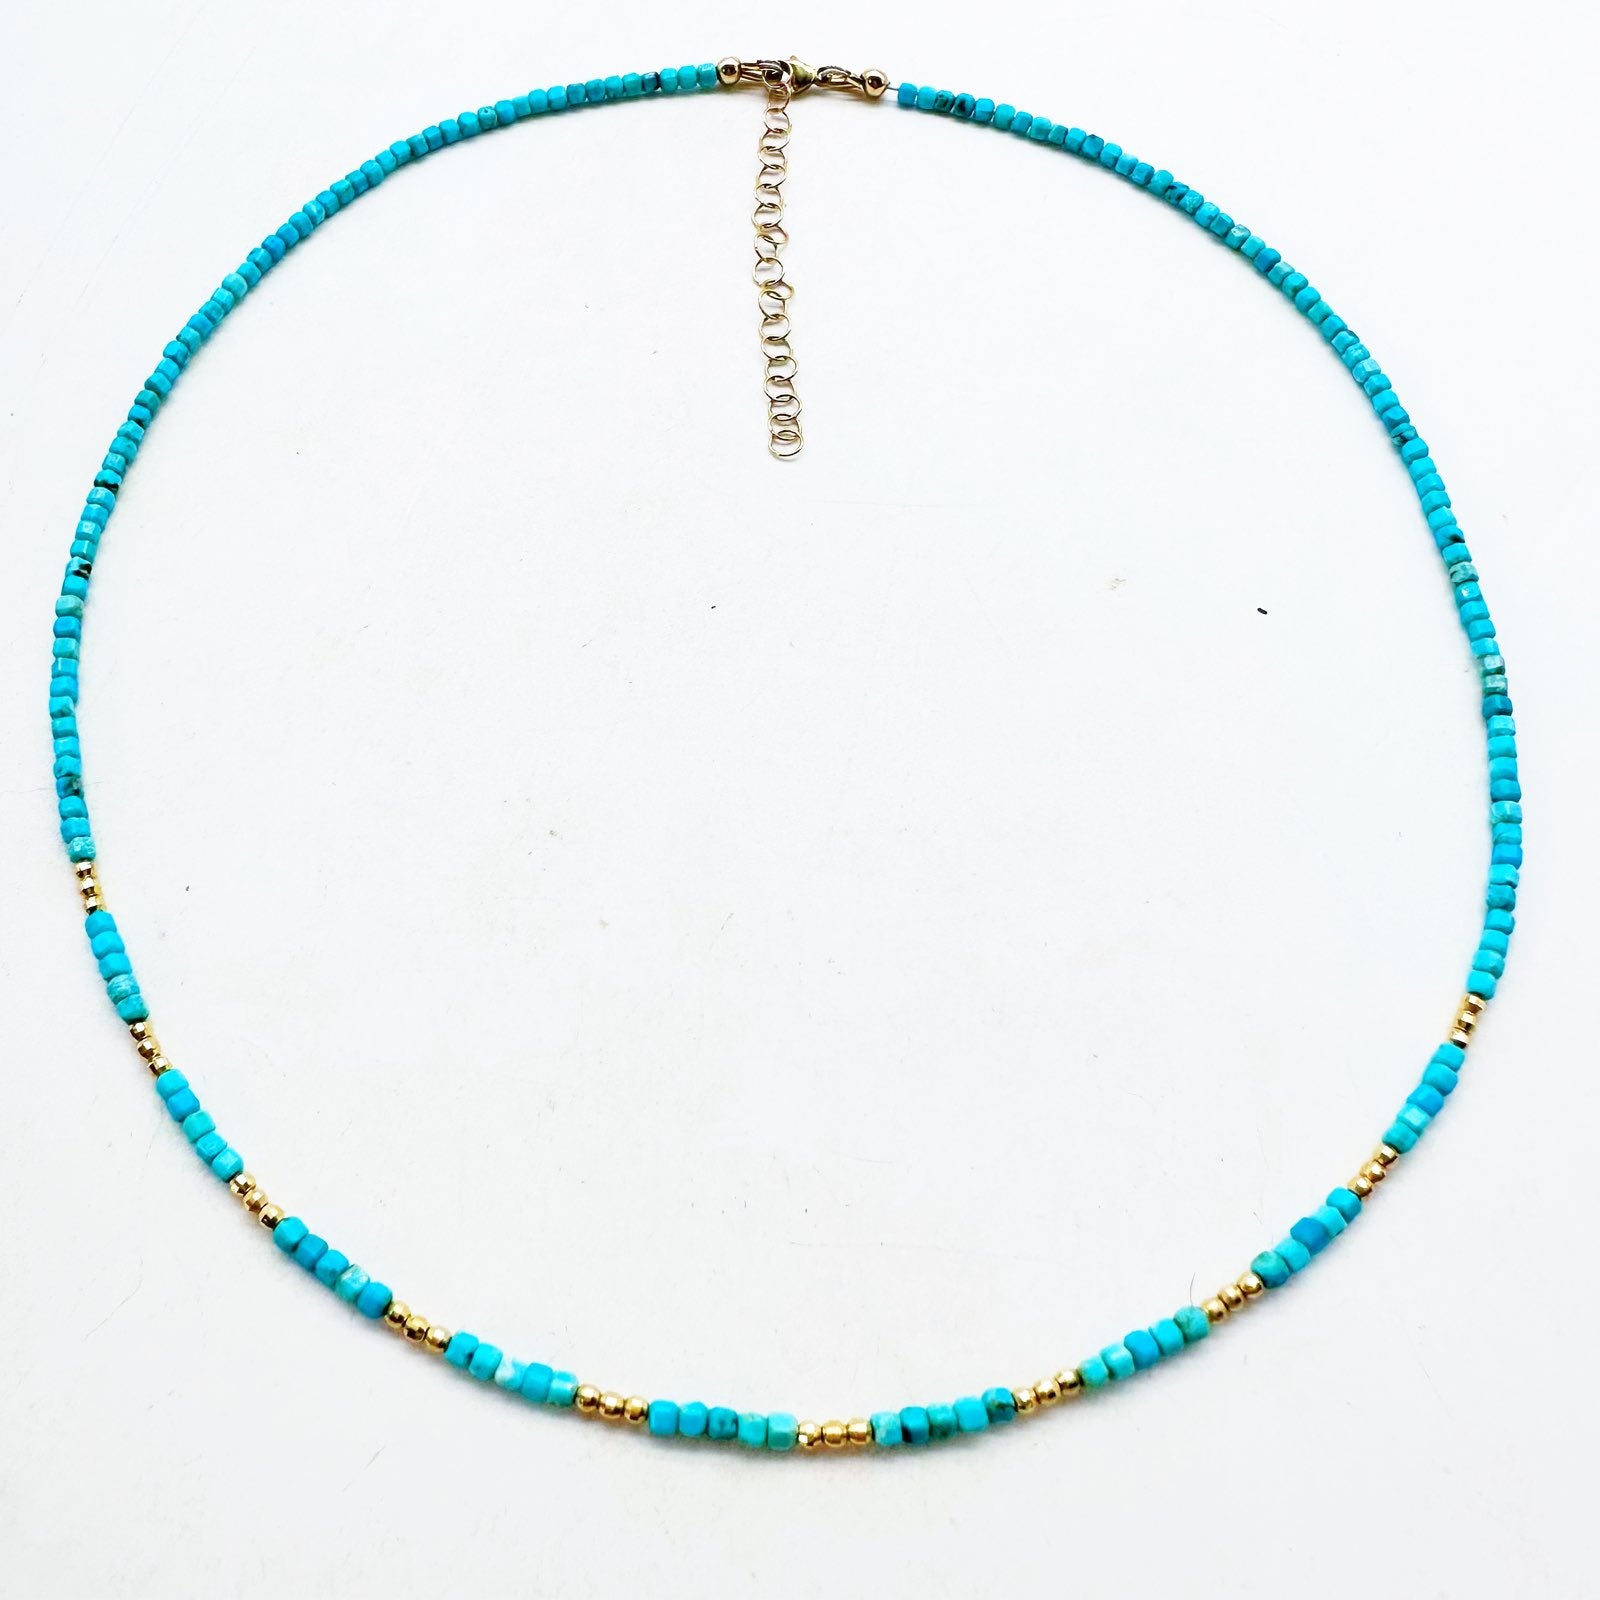 TURQUOISE STACKER NECKLACES WITH 14K GOLD